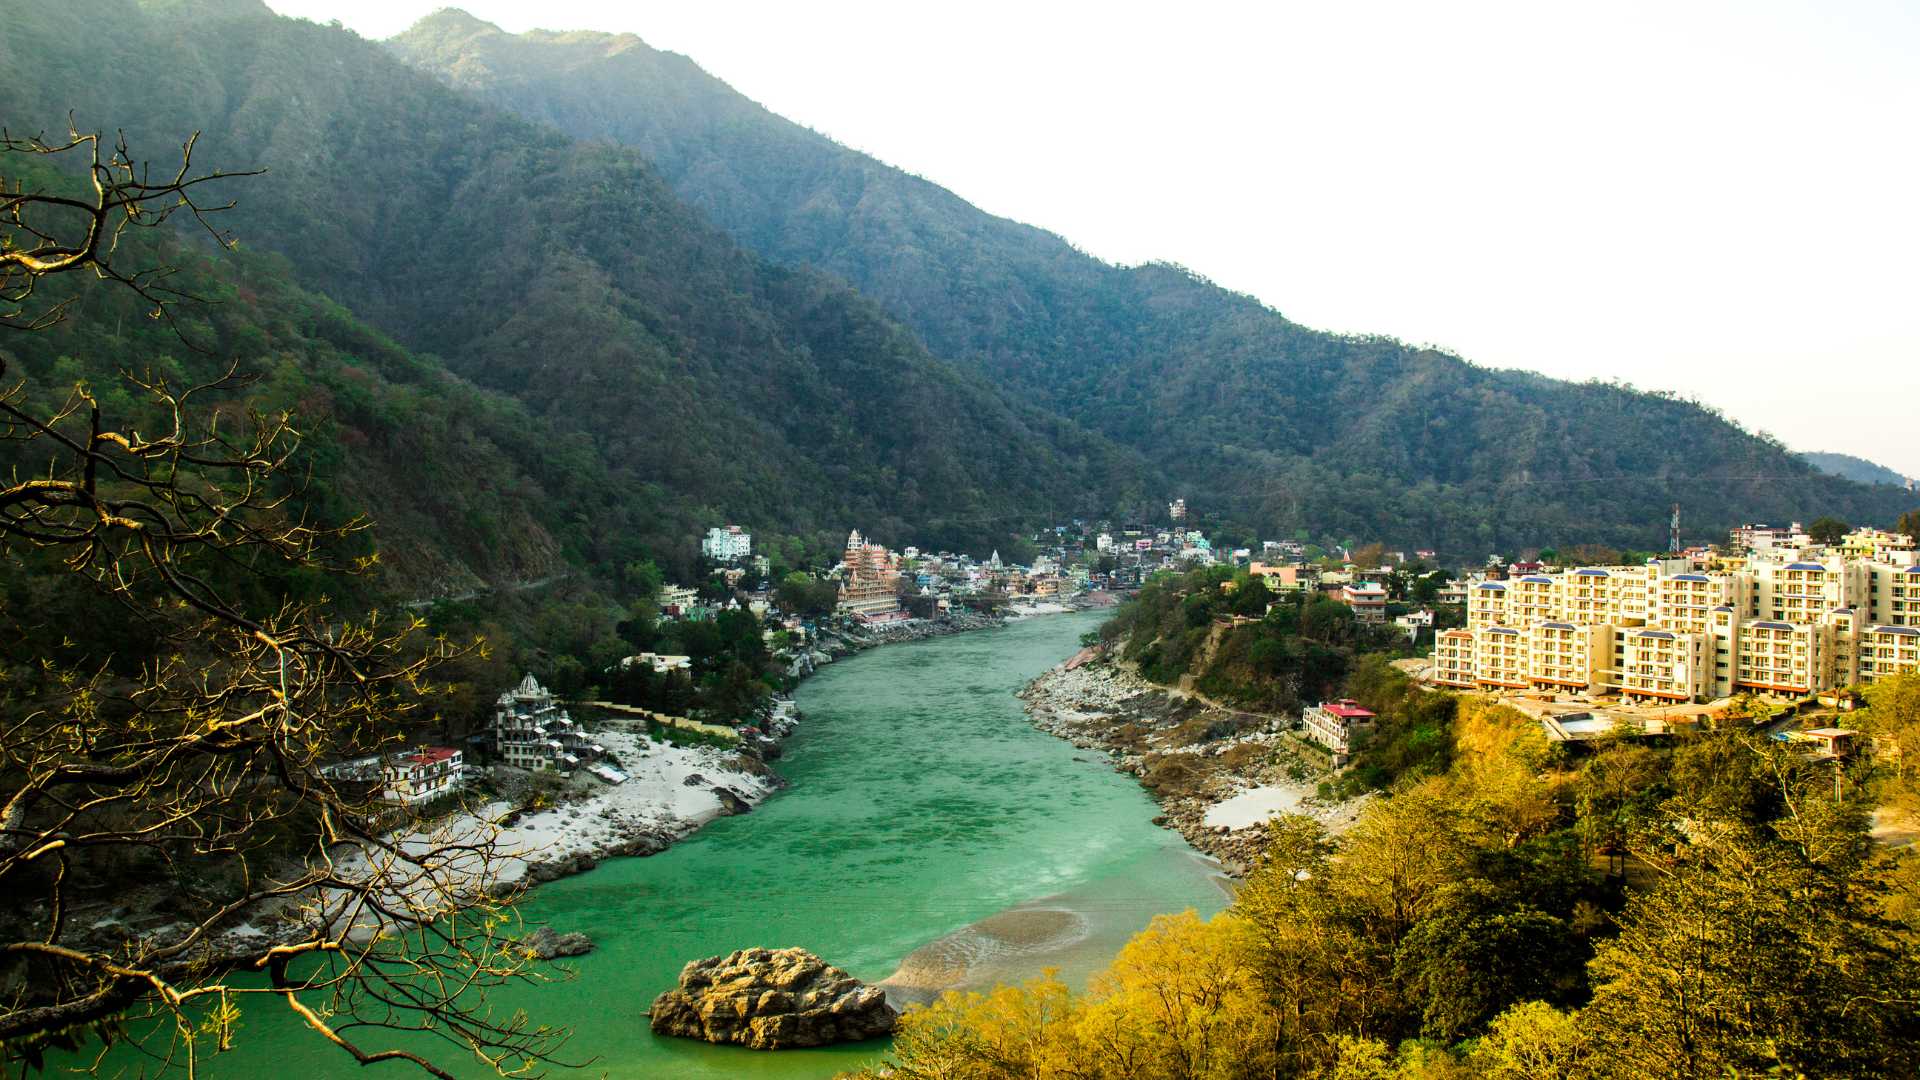 Views of the Ganges river in Rishikesh, India